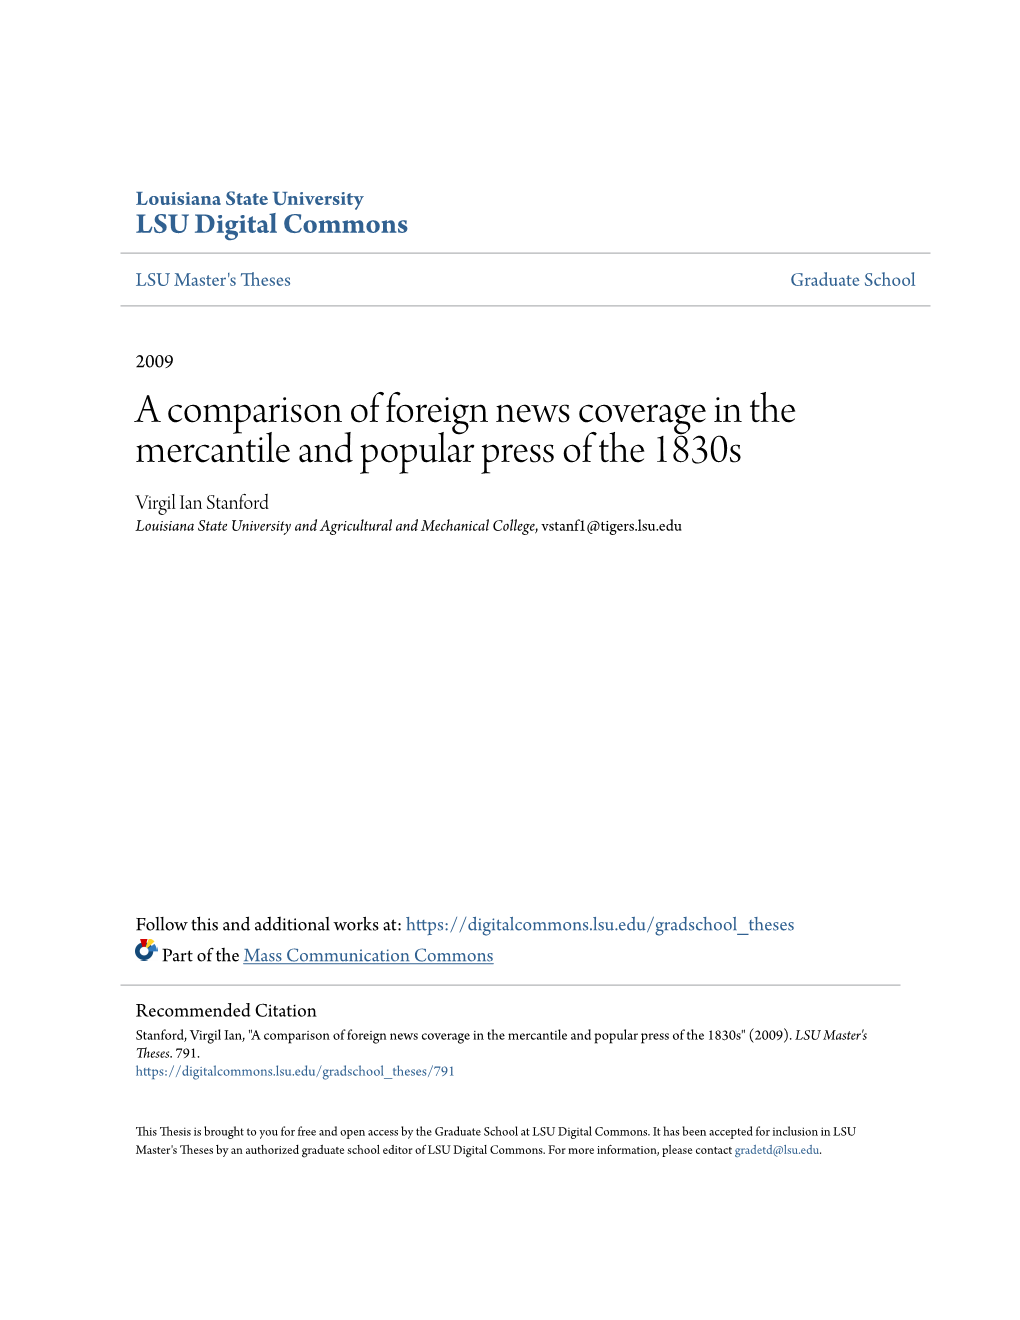 A Comparison of Foreign News Coverage in the Mercantile And